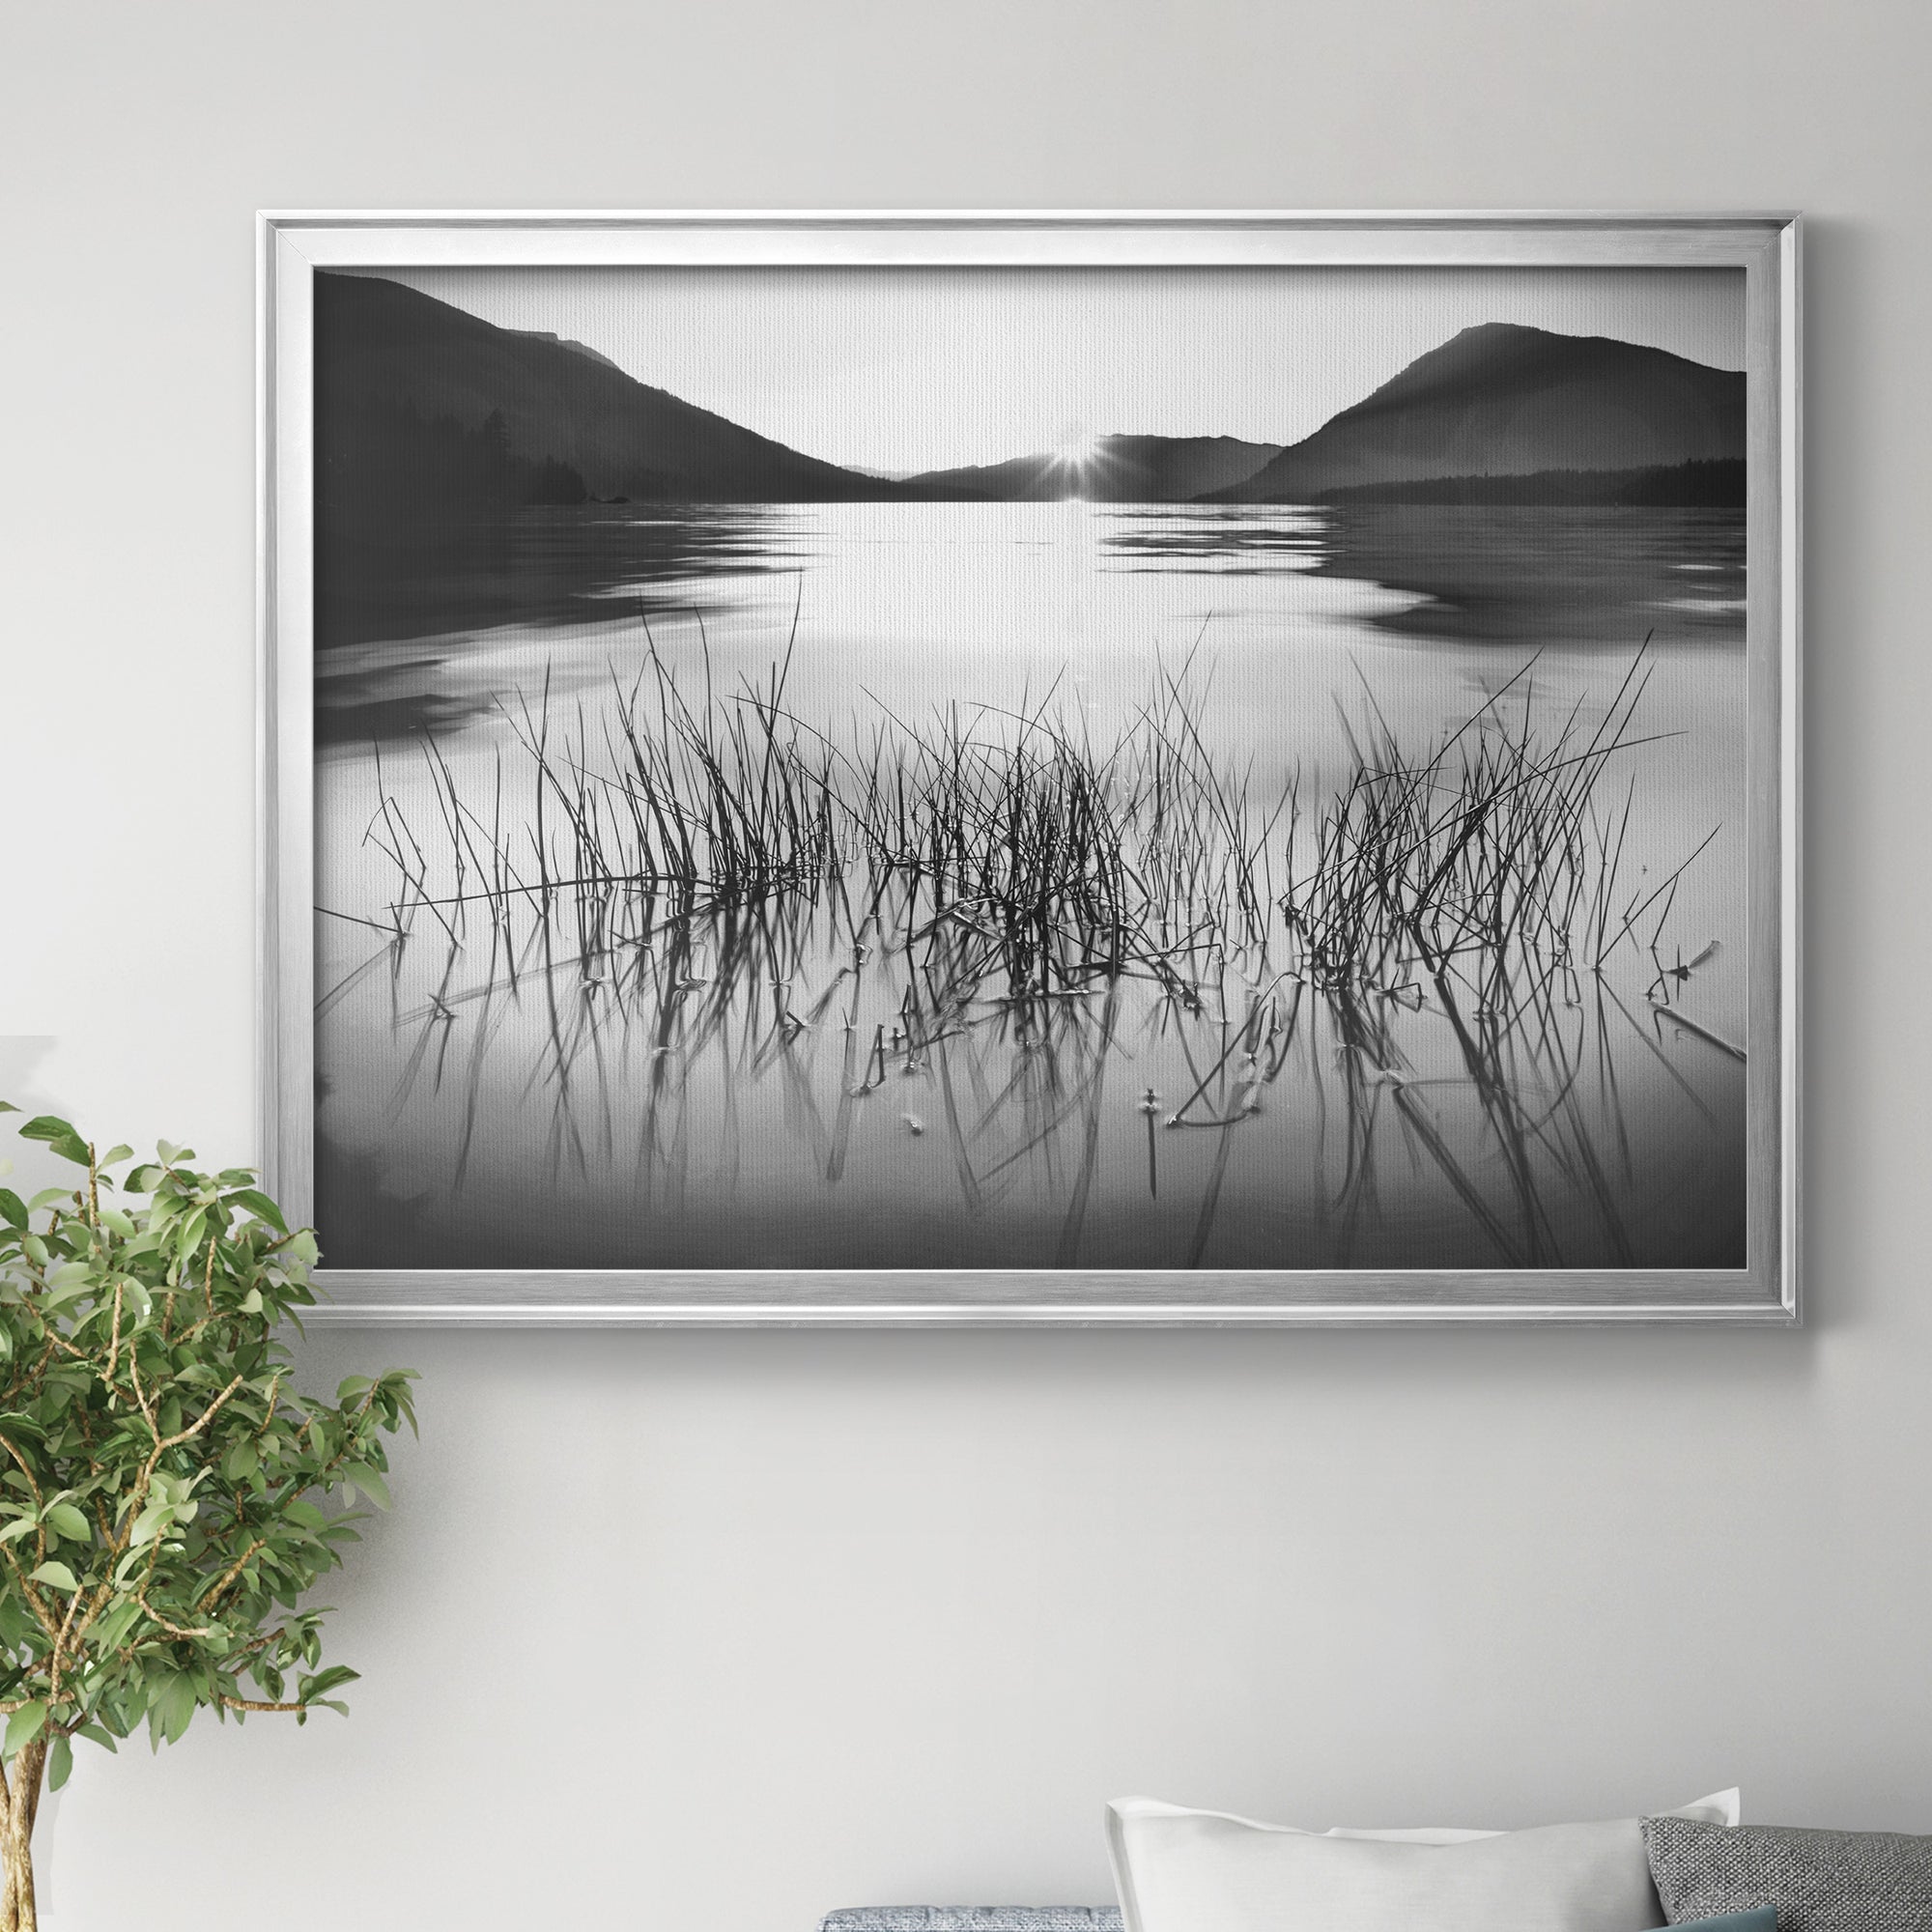 Whisper Lake Premium Classic Framed Canvas - Ready to Hang